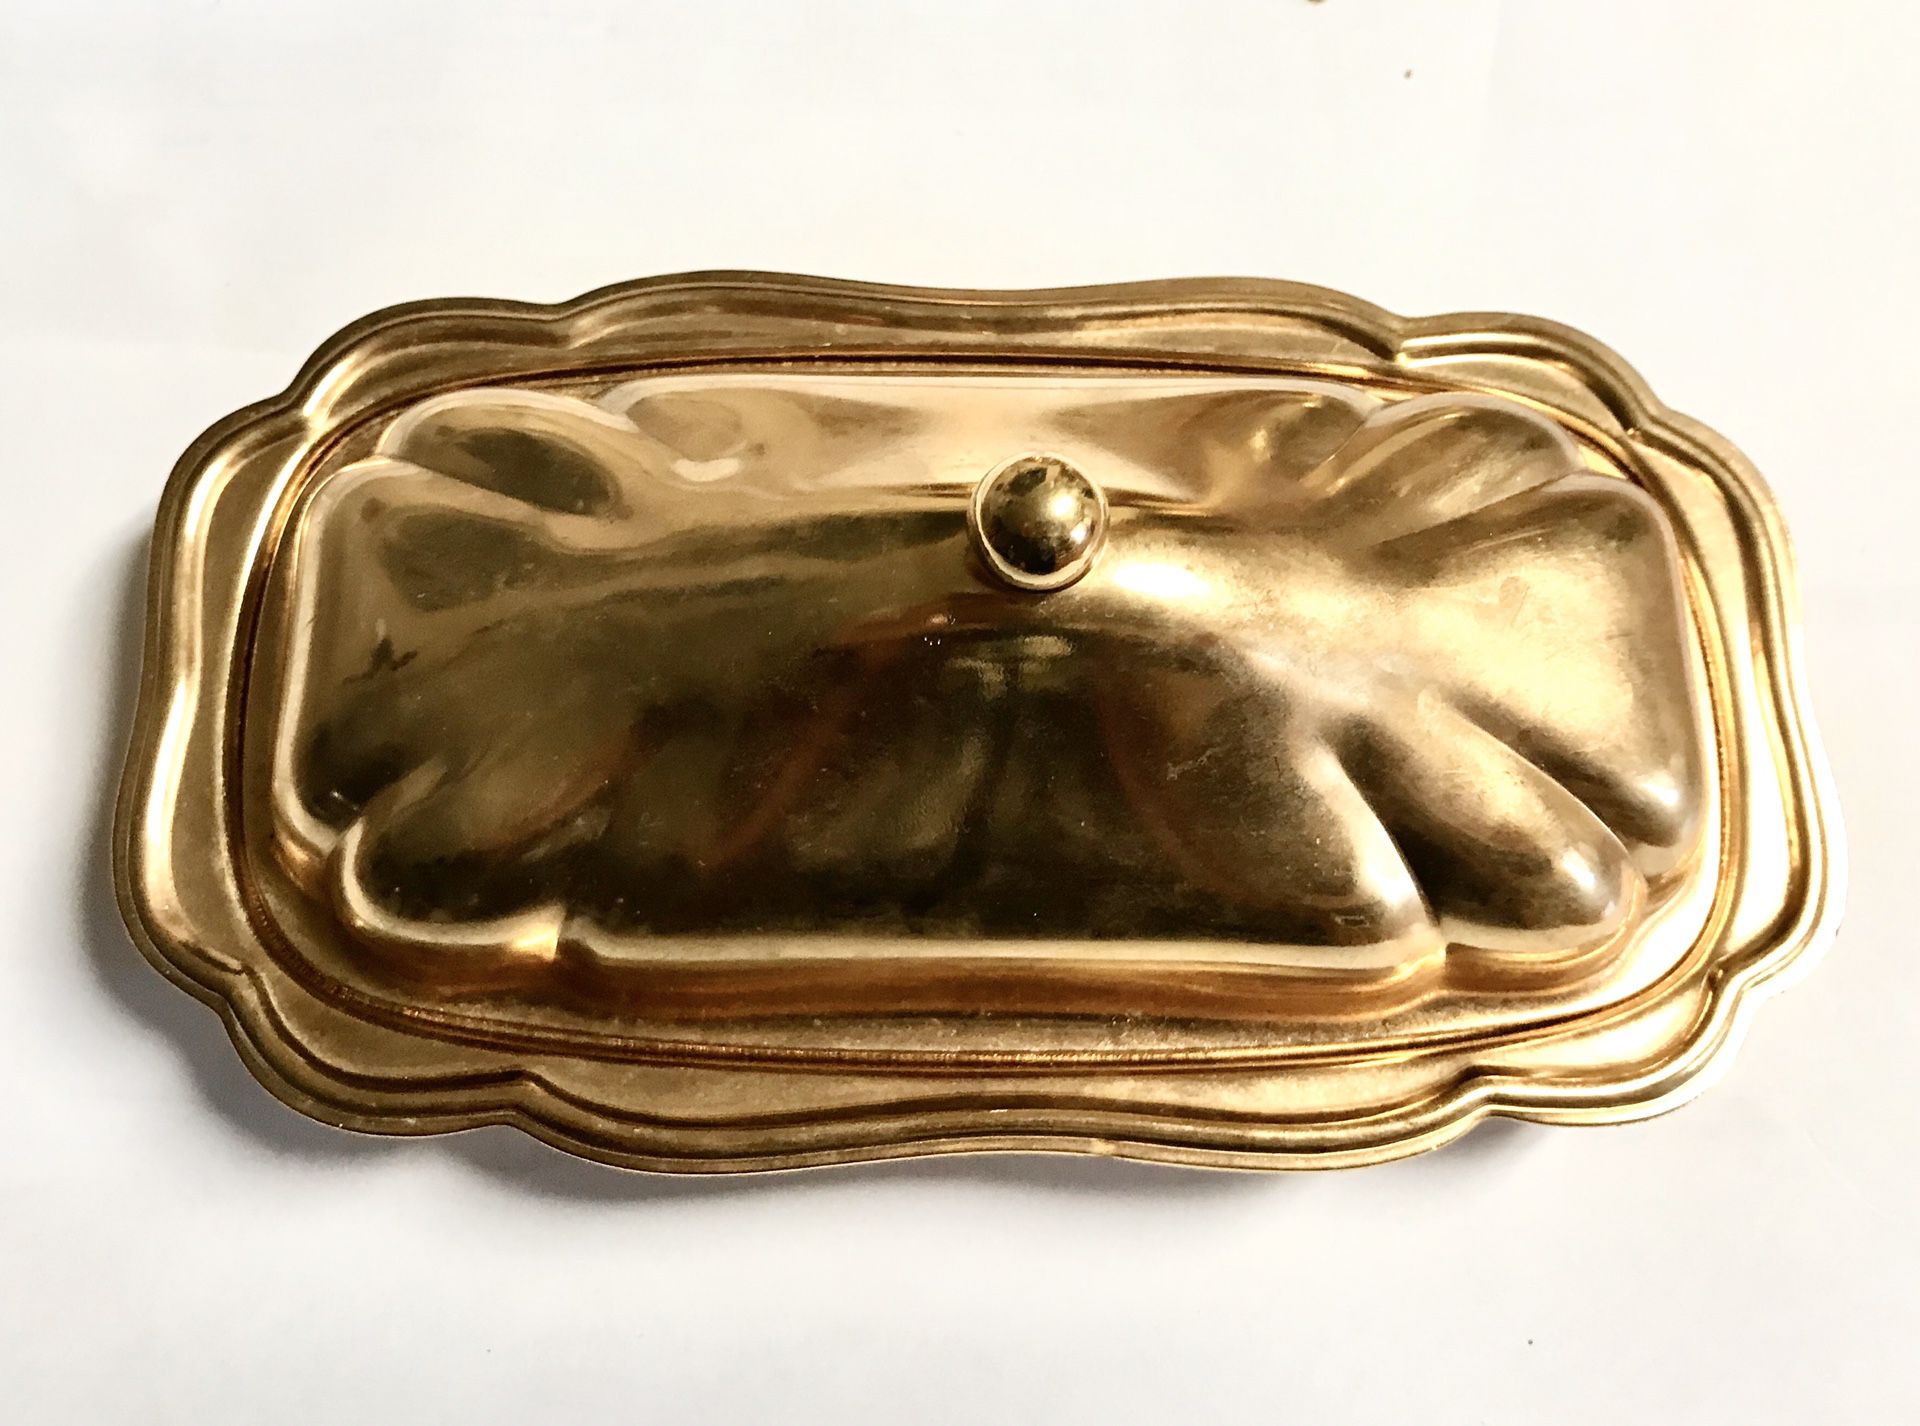 24k Gold Plated Butter Dish